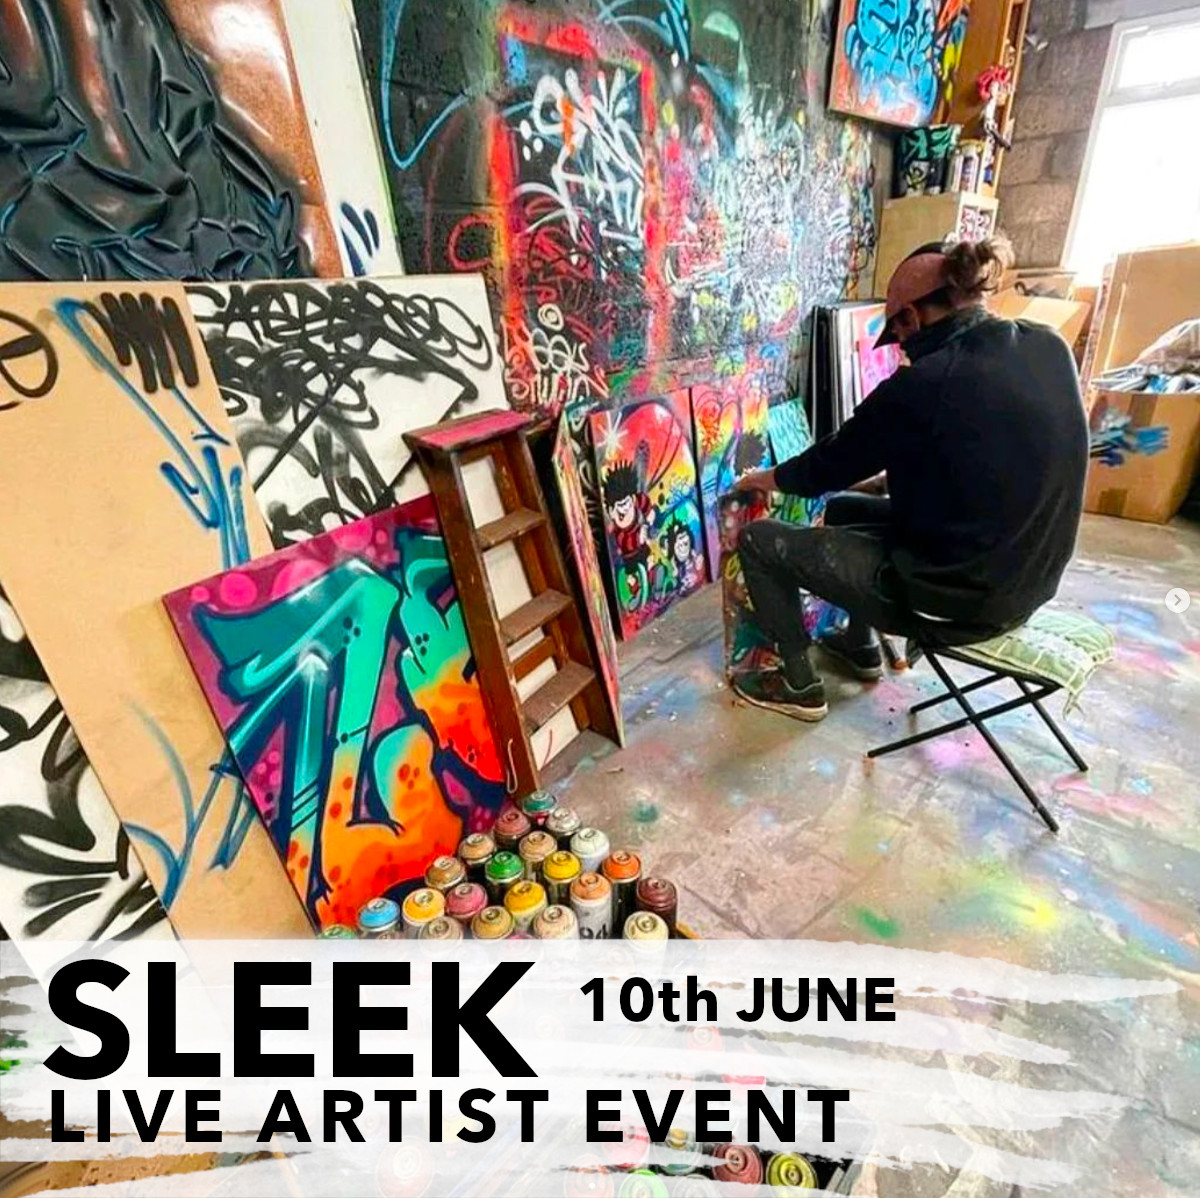 This June, Watson is thrilled to be taking part in NT art month, with two live artists events - the first of which with our favourite street artist, SLEEK on 10th June, 2-5pm
#edinburghart #streetart #graffiti #tagging #edinburghartist #scottishartist #ntartmonth